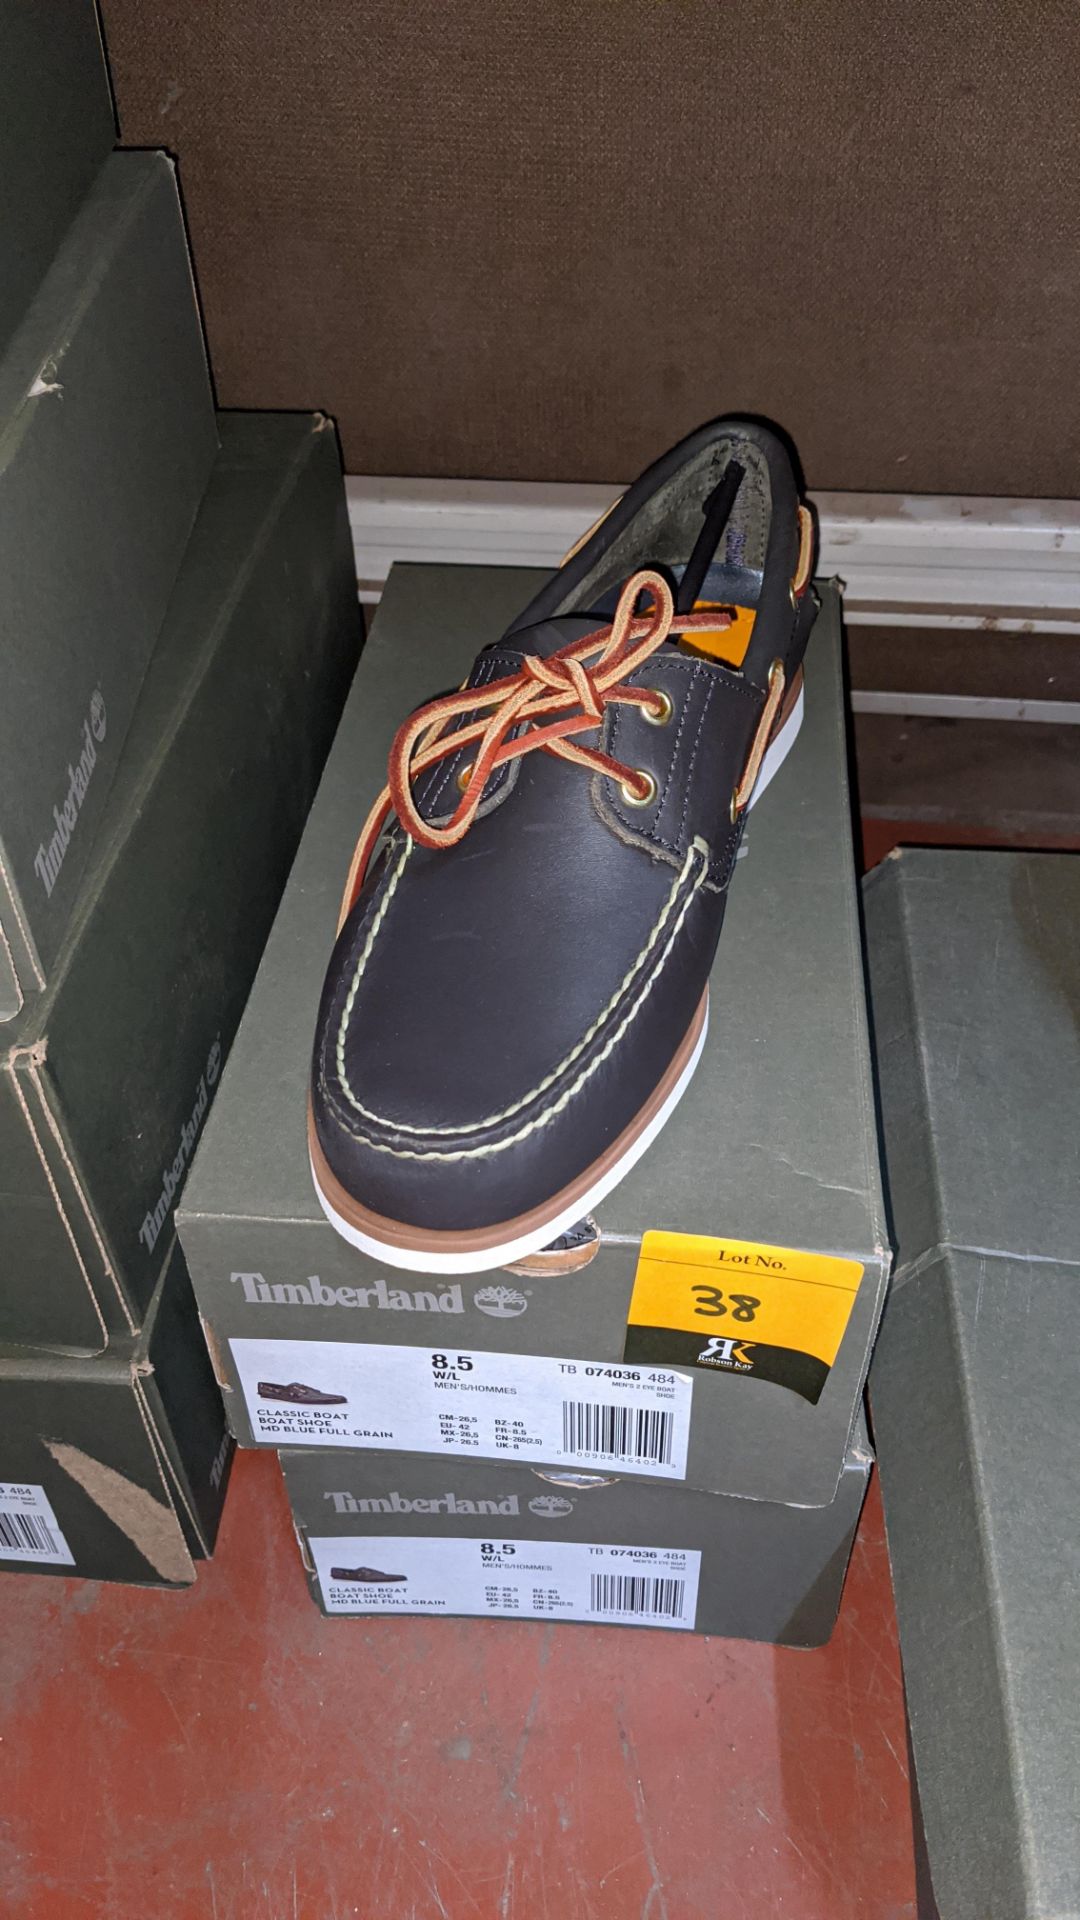 2 pairs of Timberland Classic boat shoes in MD Blue full grain leather both in sizes US 8.5 - all